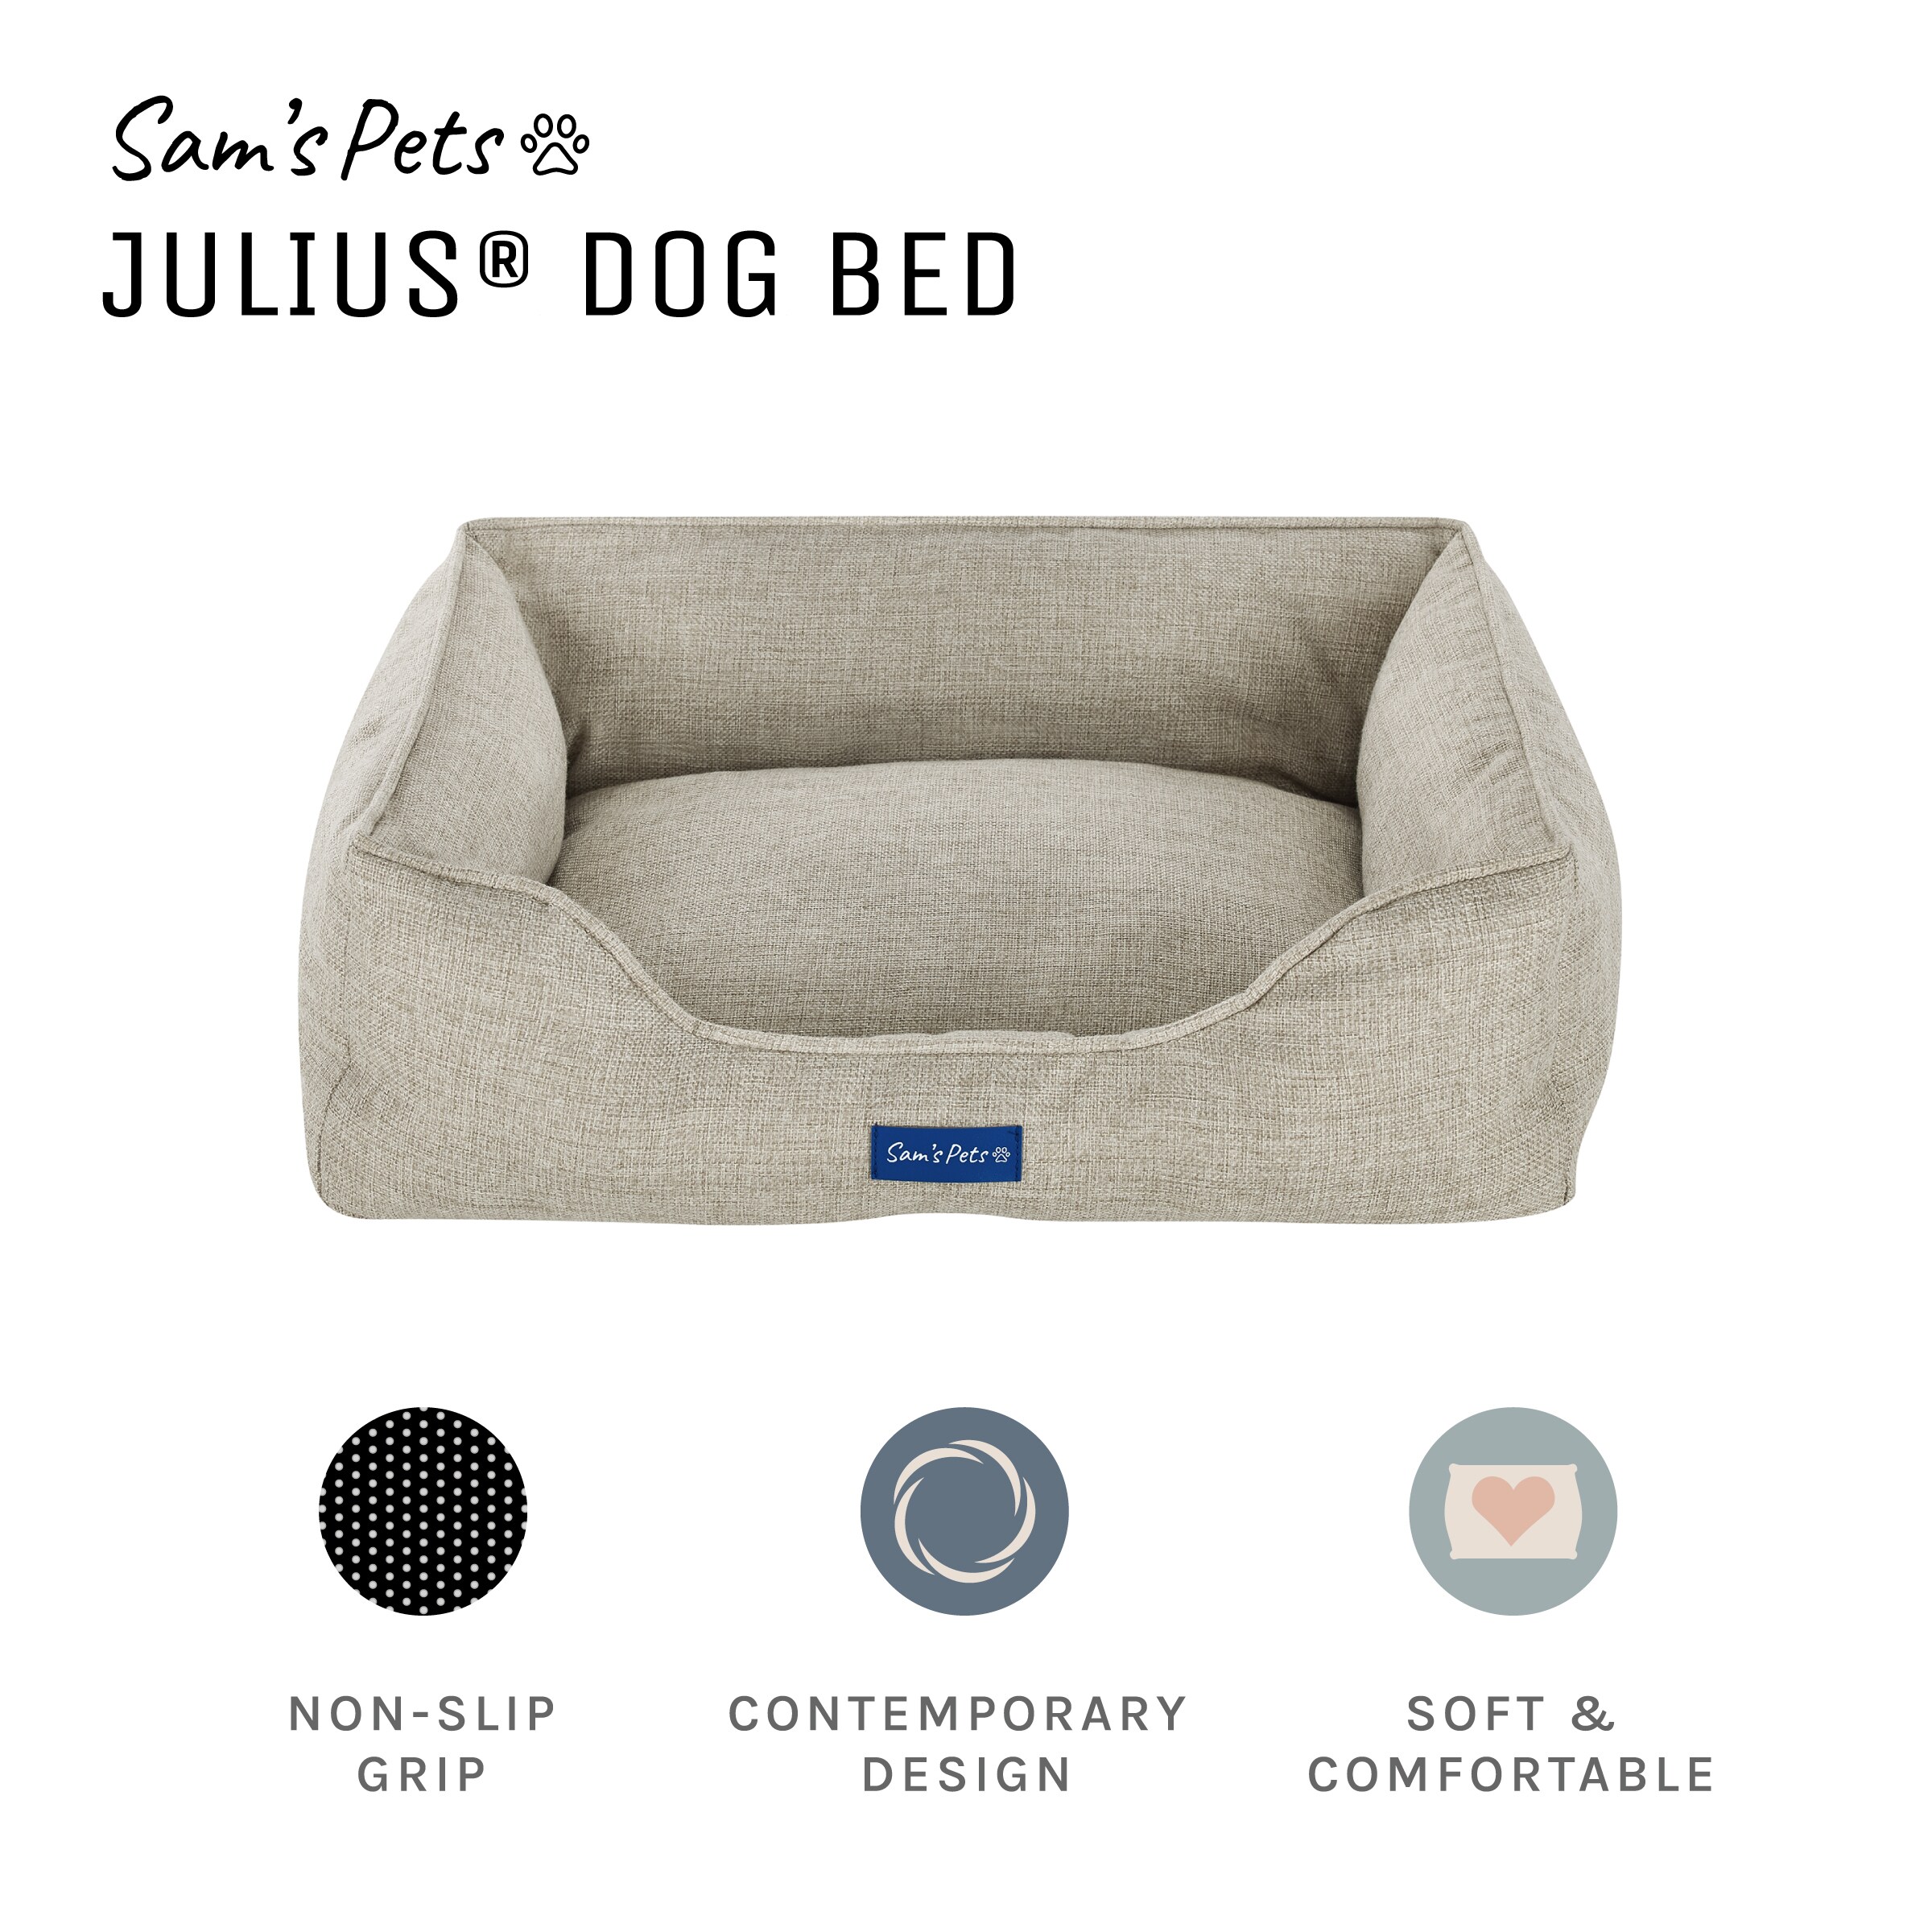 Sam's Pets Square Brown Bolster Dog Bed (Medium) in the Pet Beds